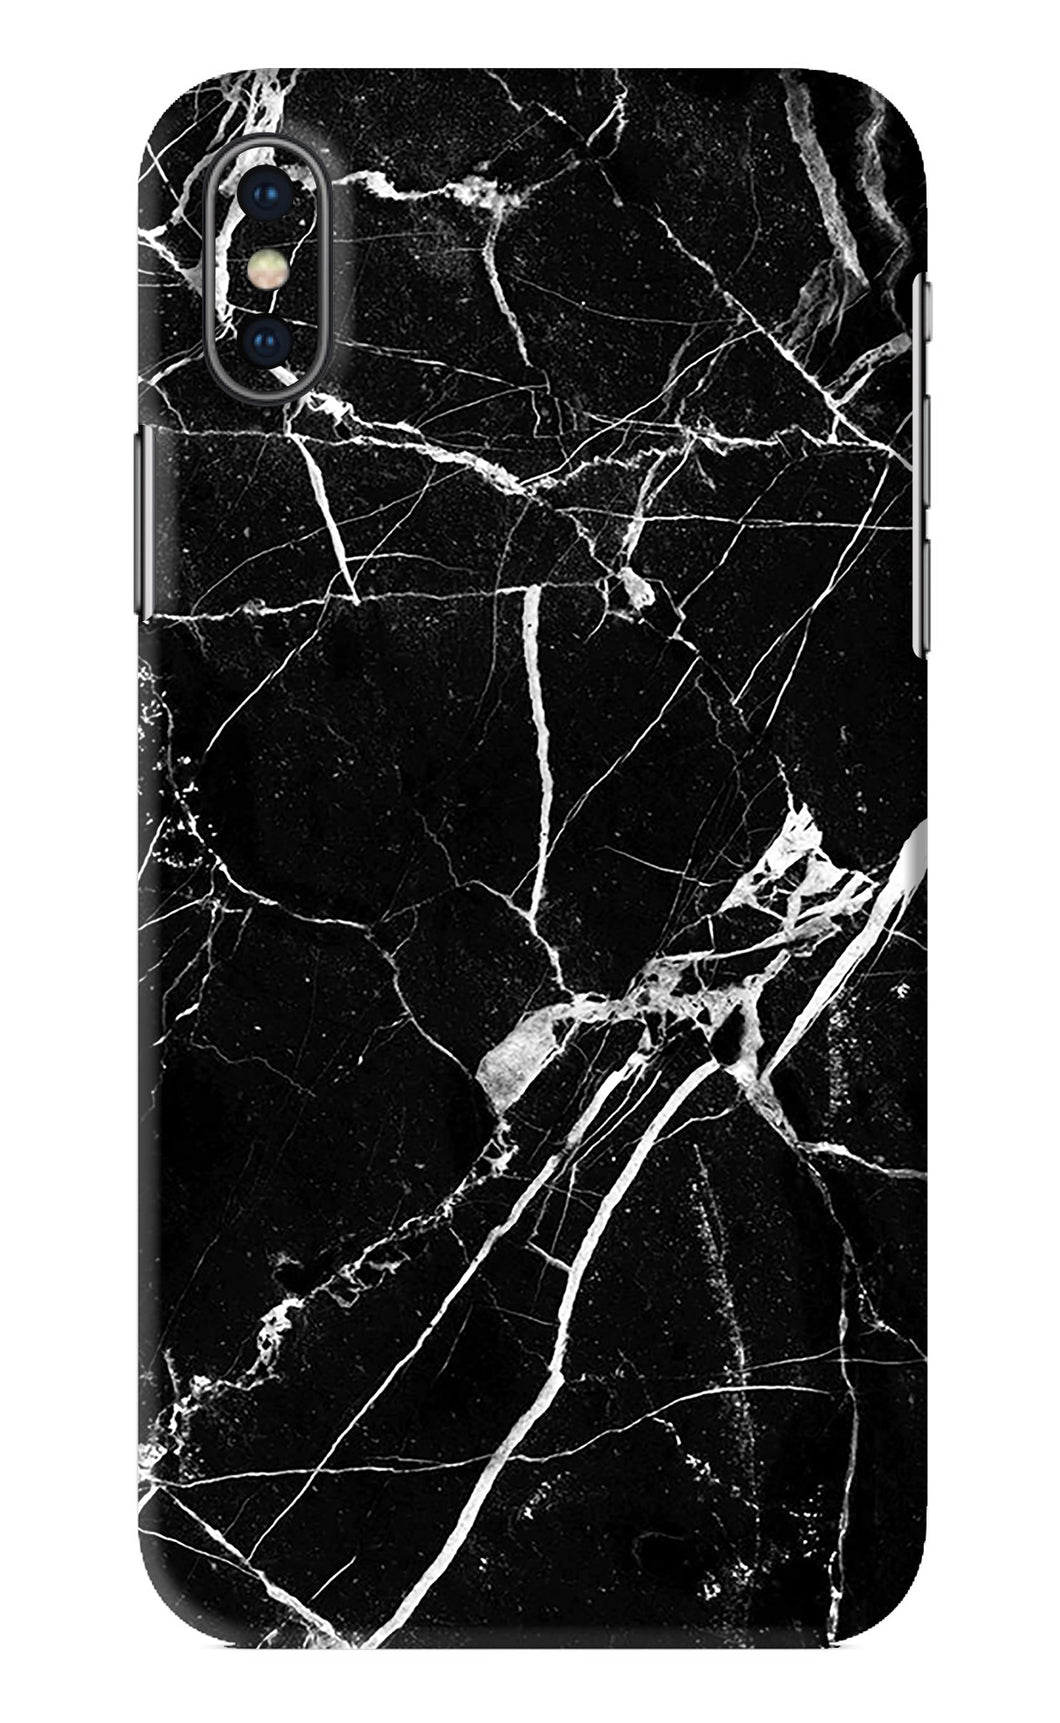 Black Marble Texture 2 iPhone X Back Skin Wrap